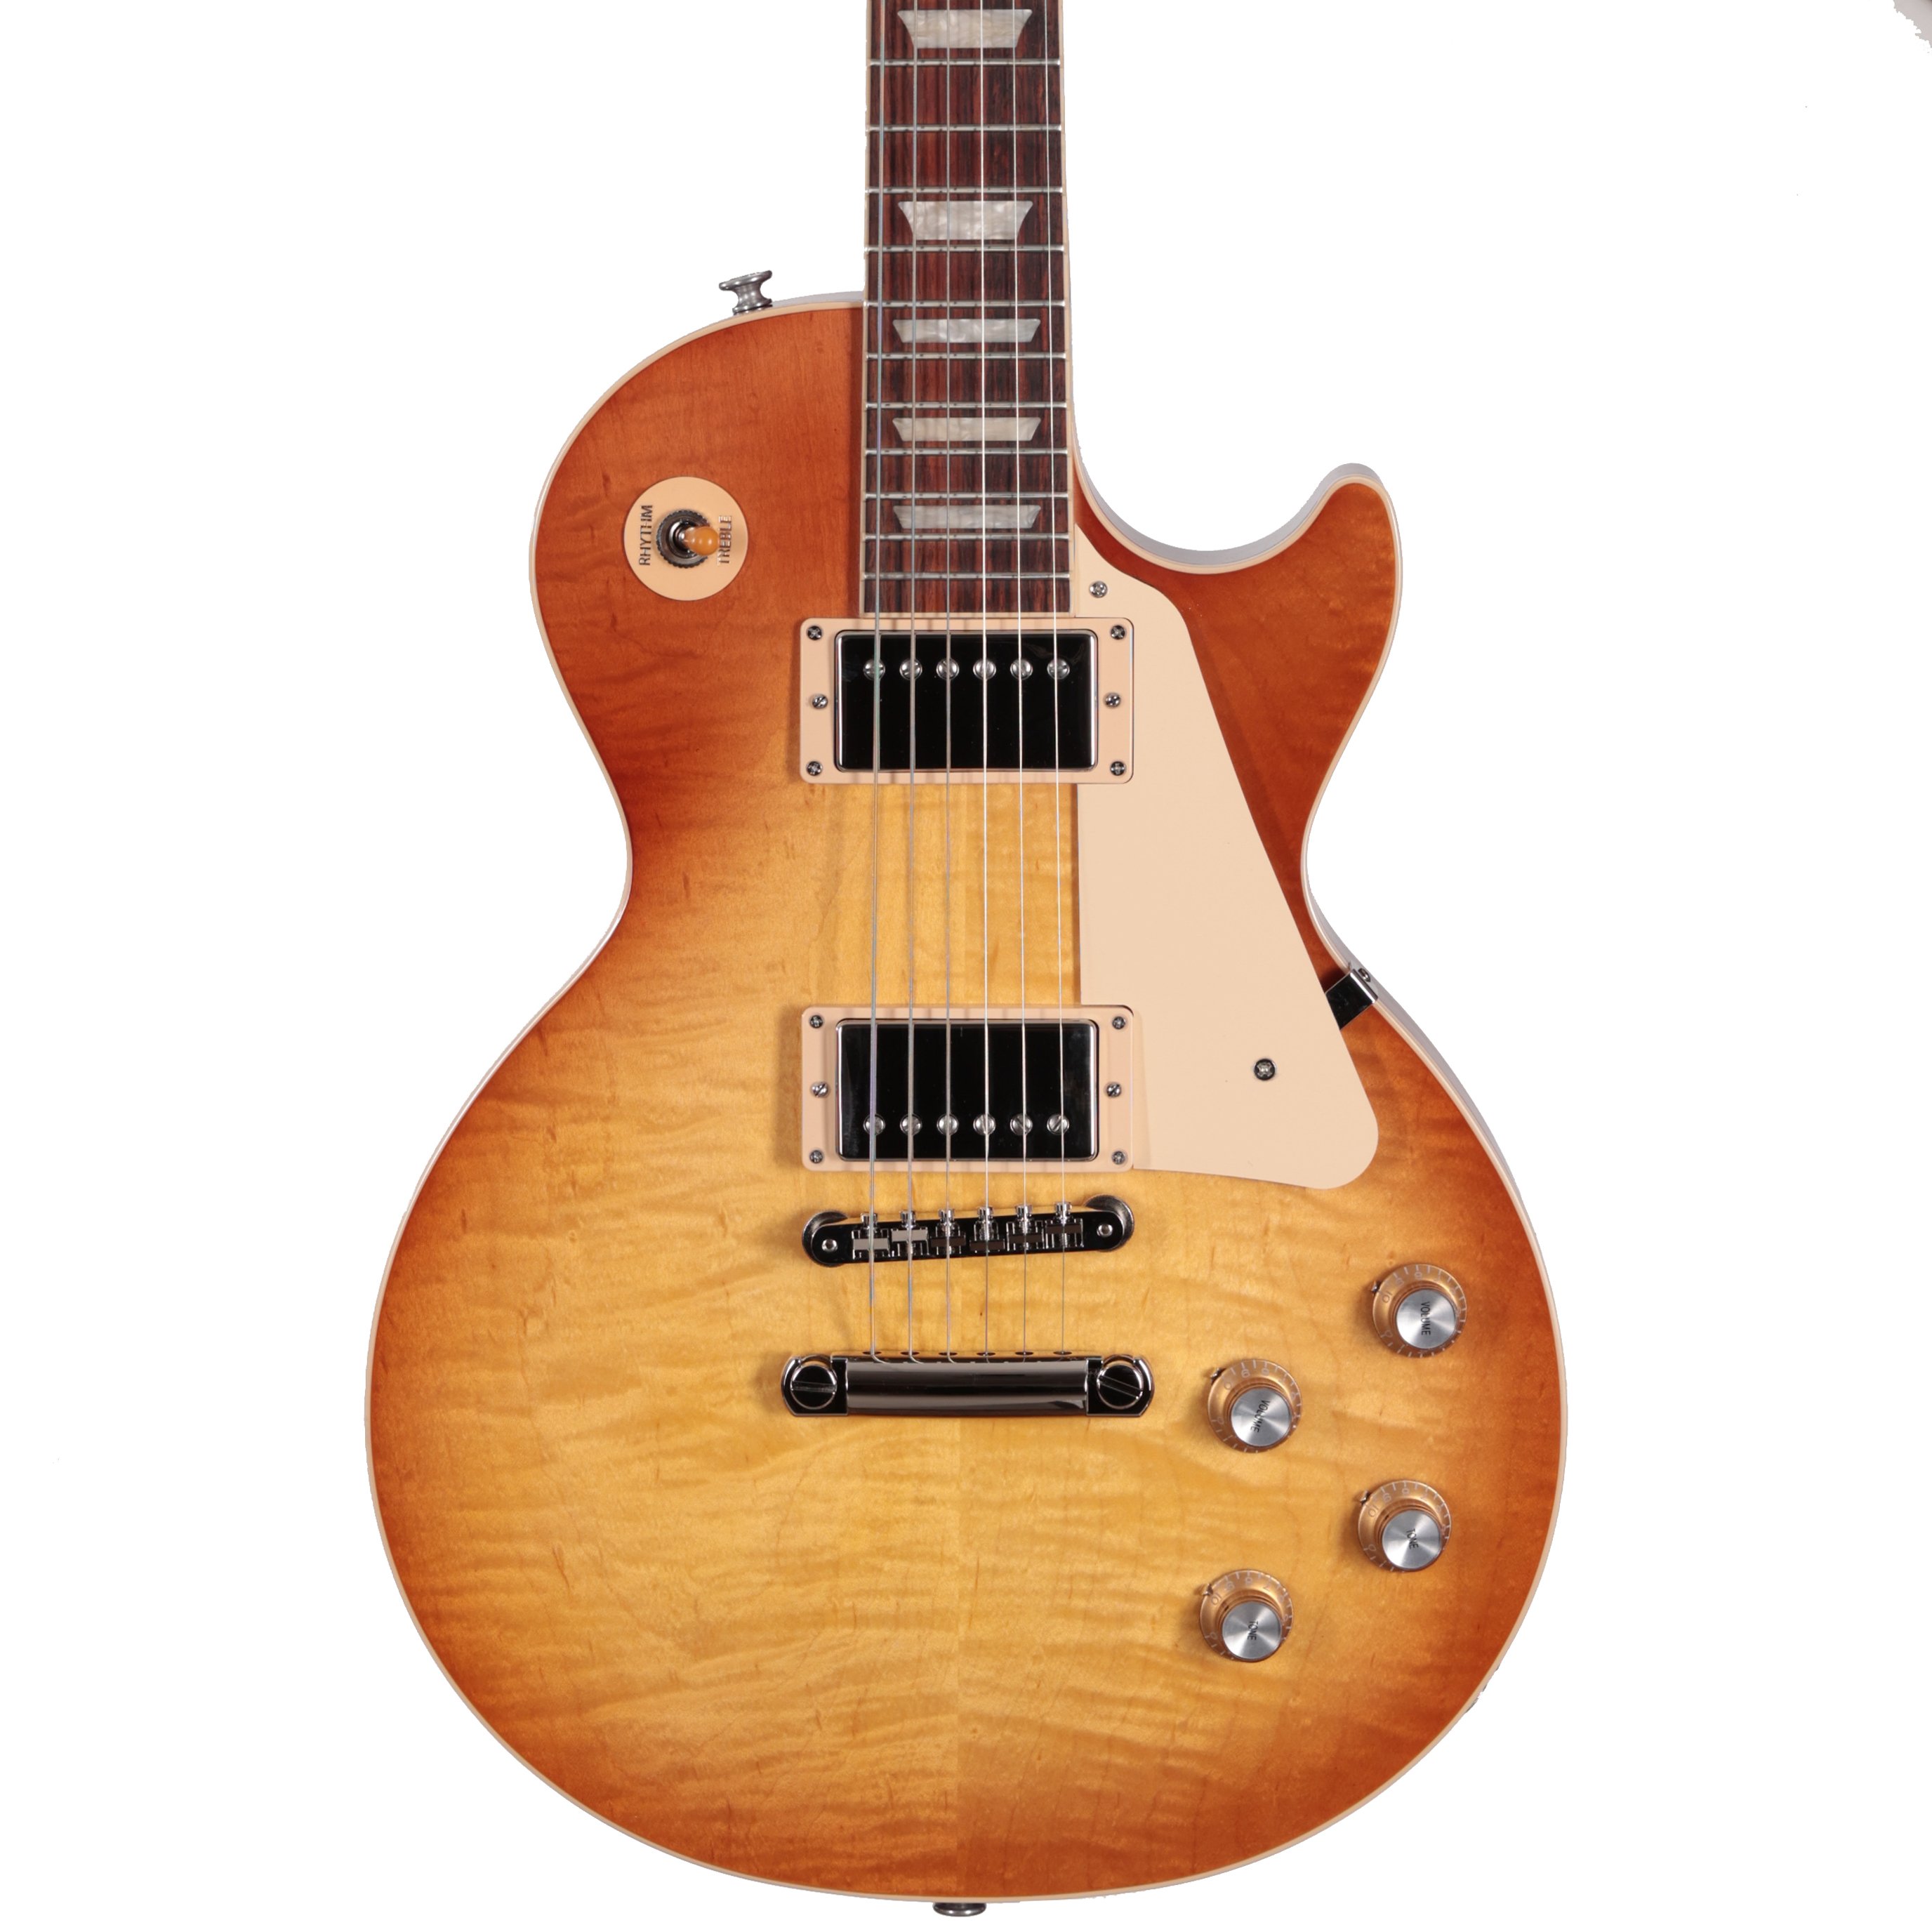 Gibson USA Les Paul Standard '60s Electric Guitar in Unburst 